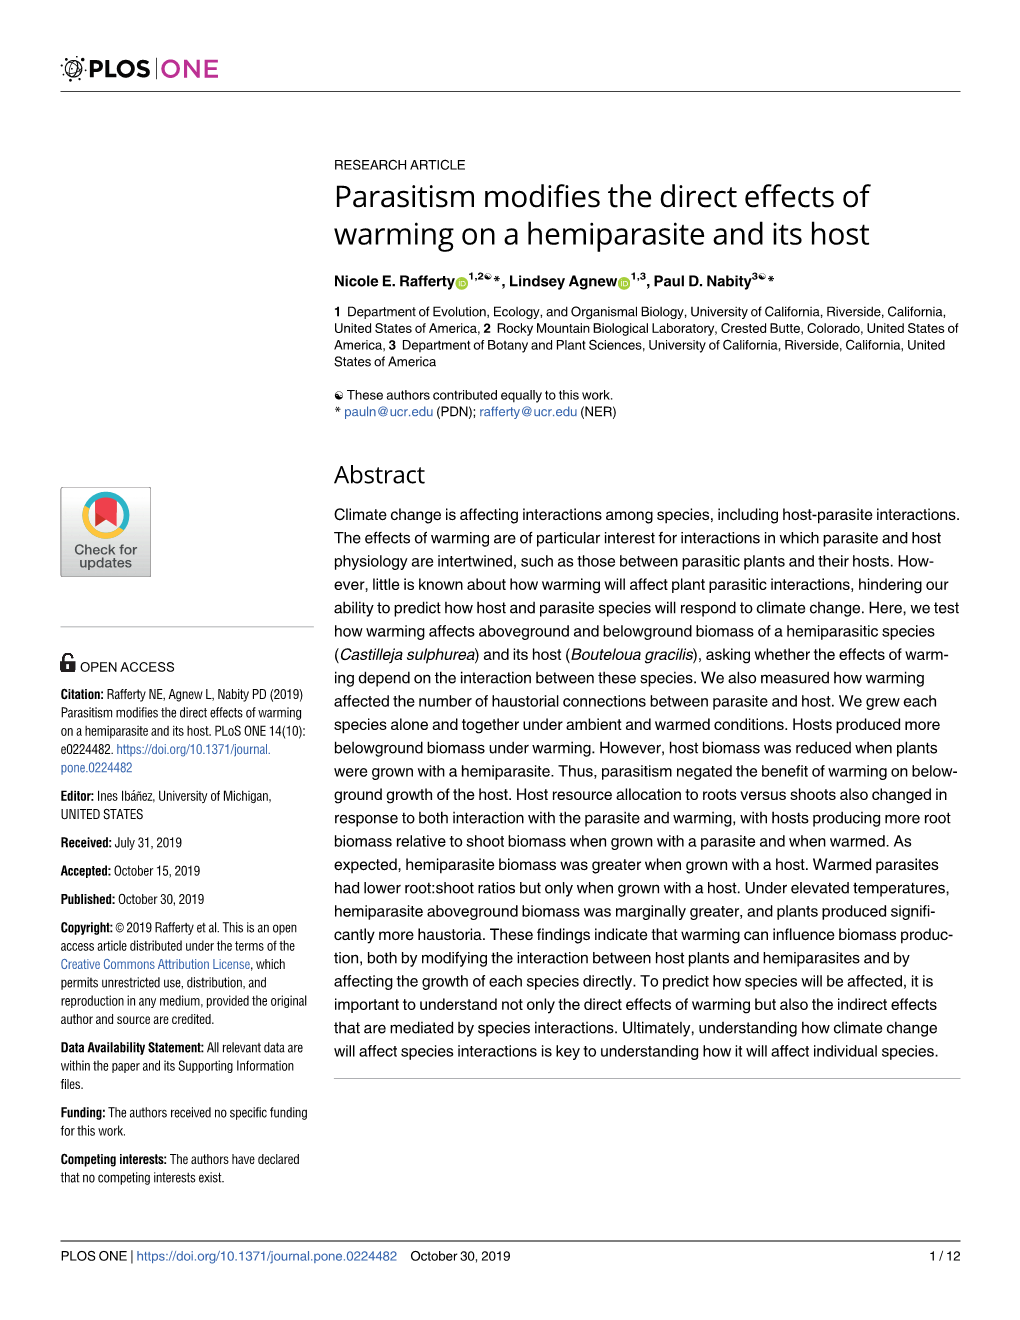 Parasitism Modifies the Direct Effects of Warming on a Hemiparasite and Its Host